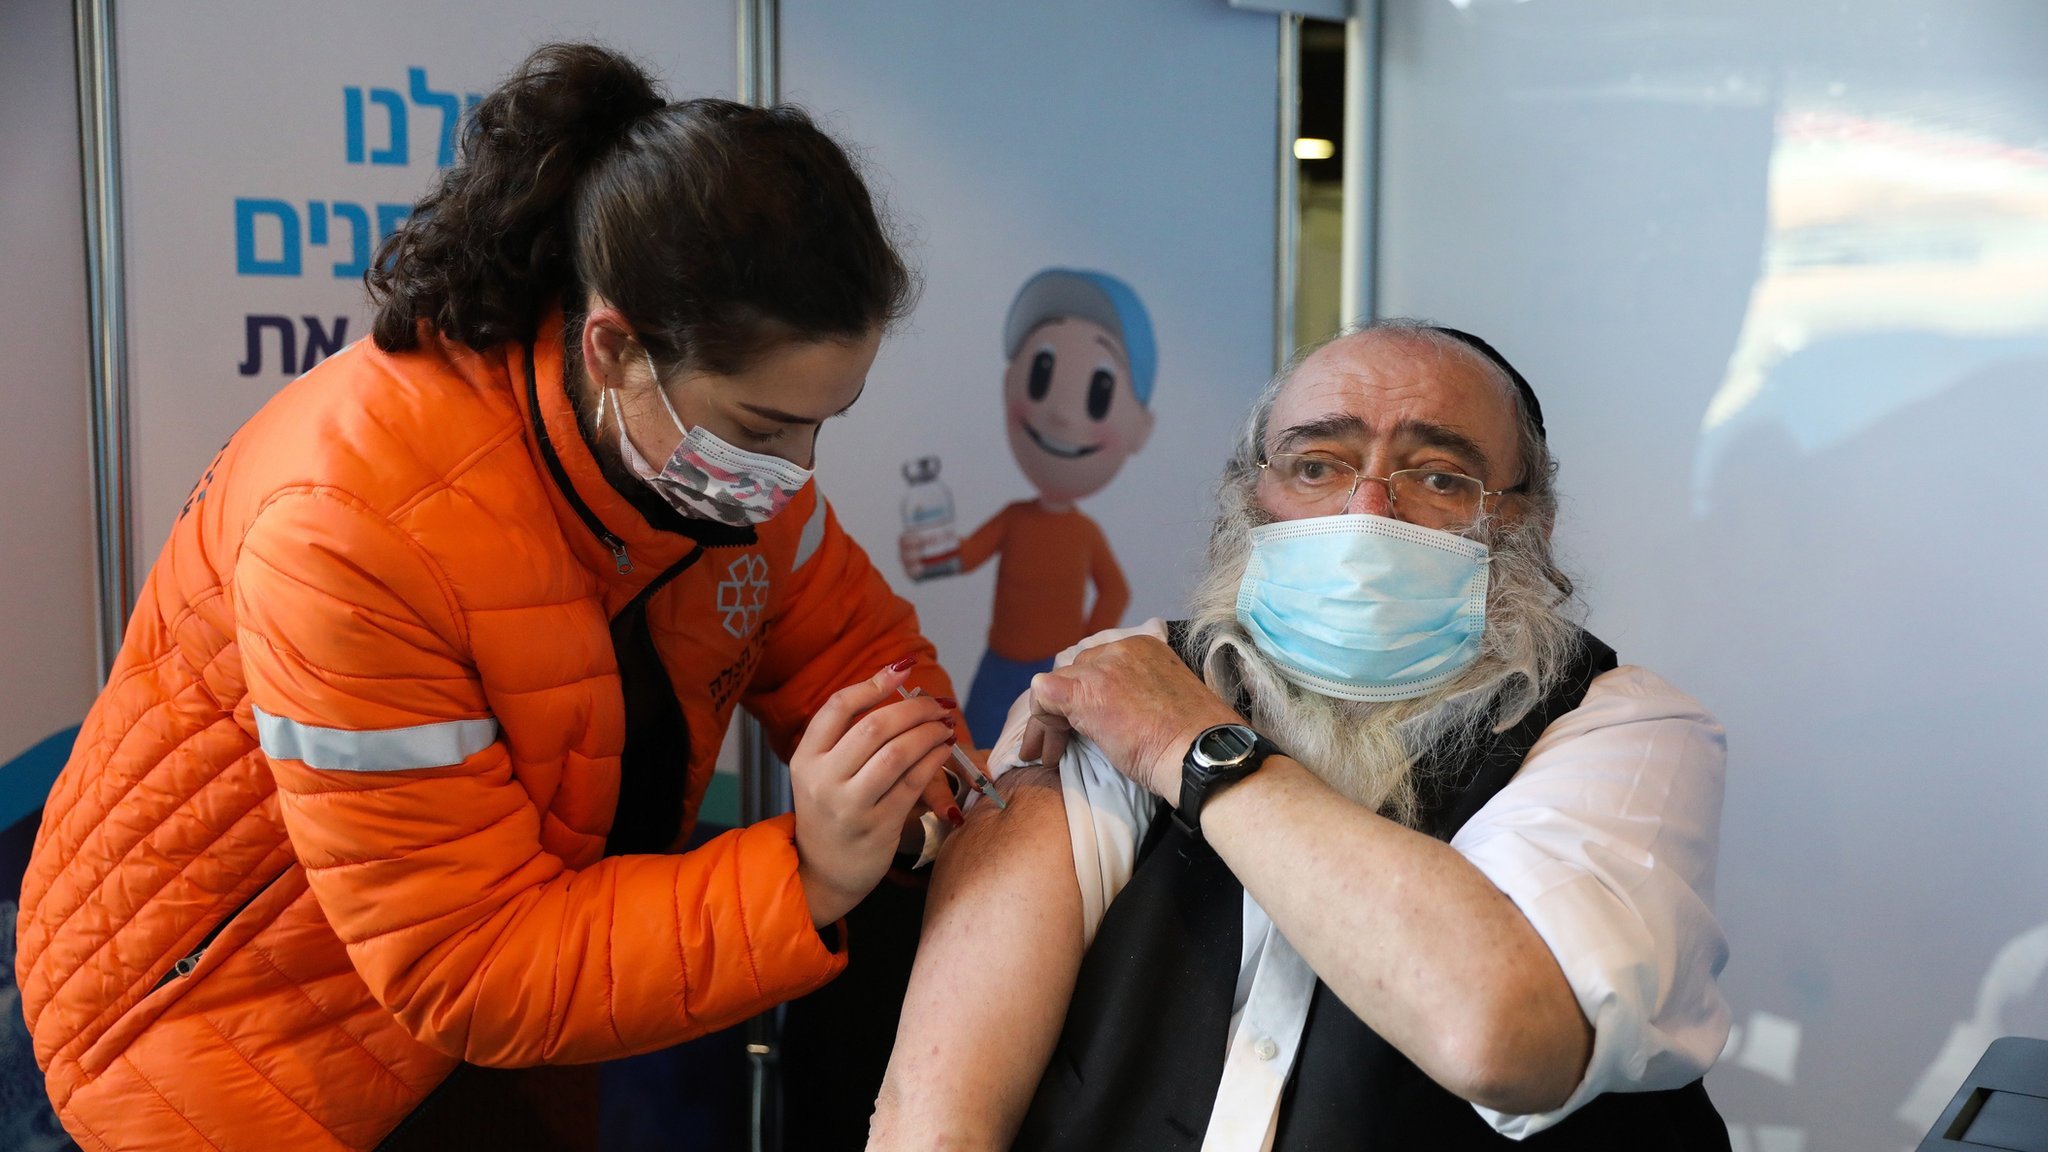 Israel has achieved a creditable milestone by vaccinating People